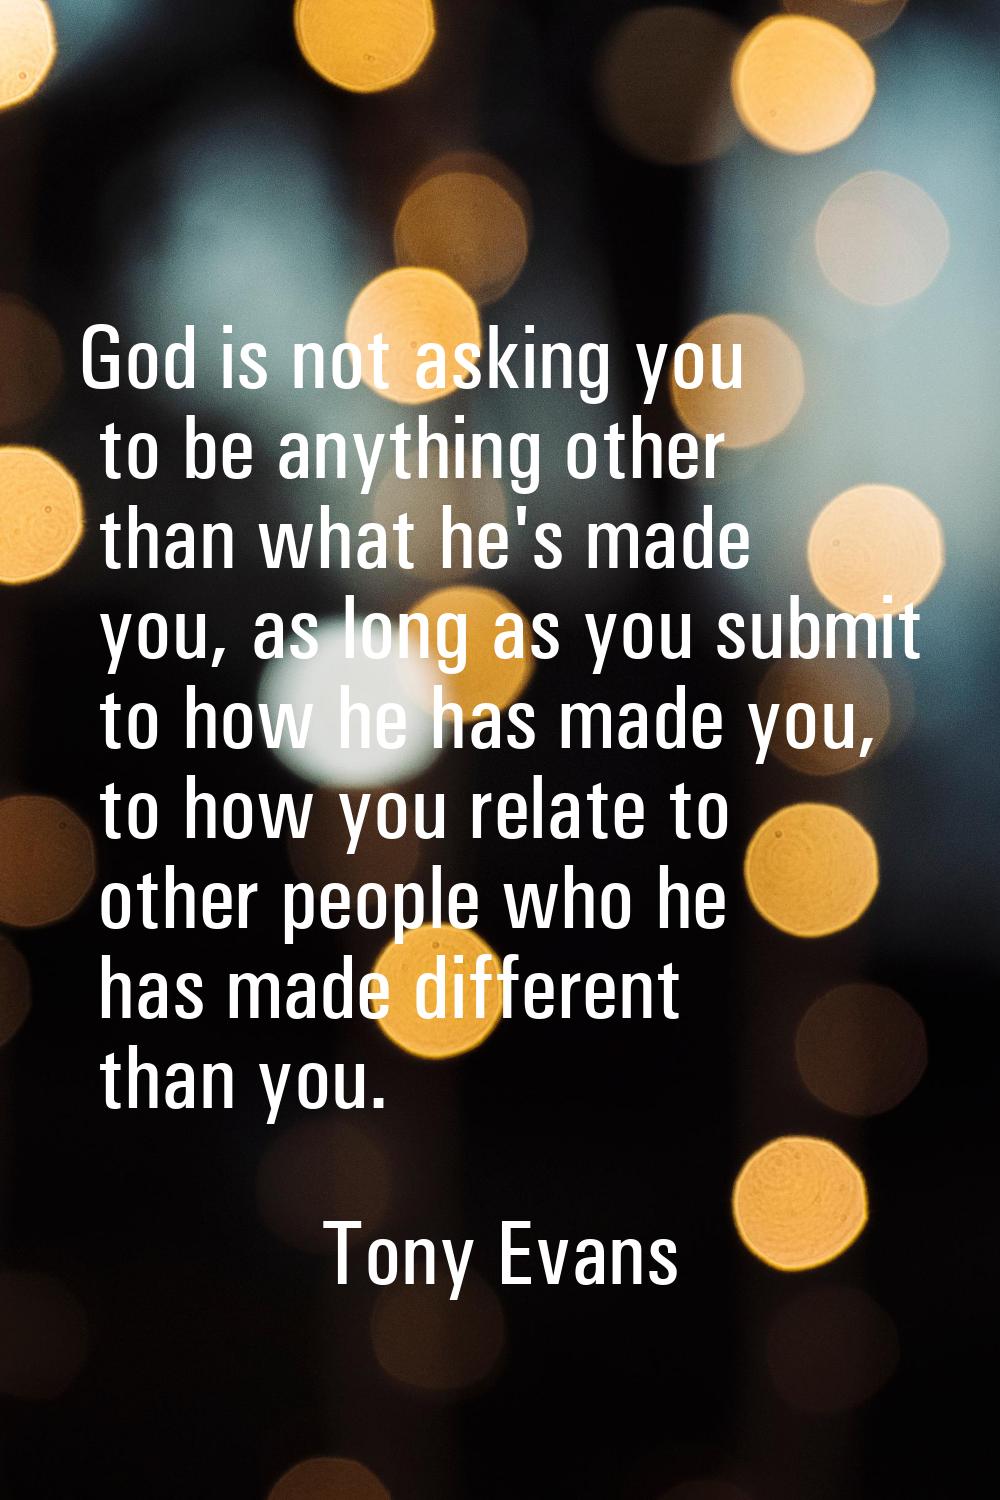 God is not asking you to be anything other than what he's made you, as long as you submit to how he